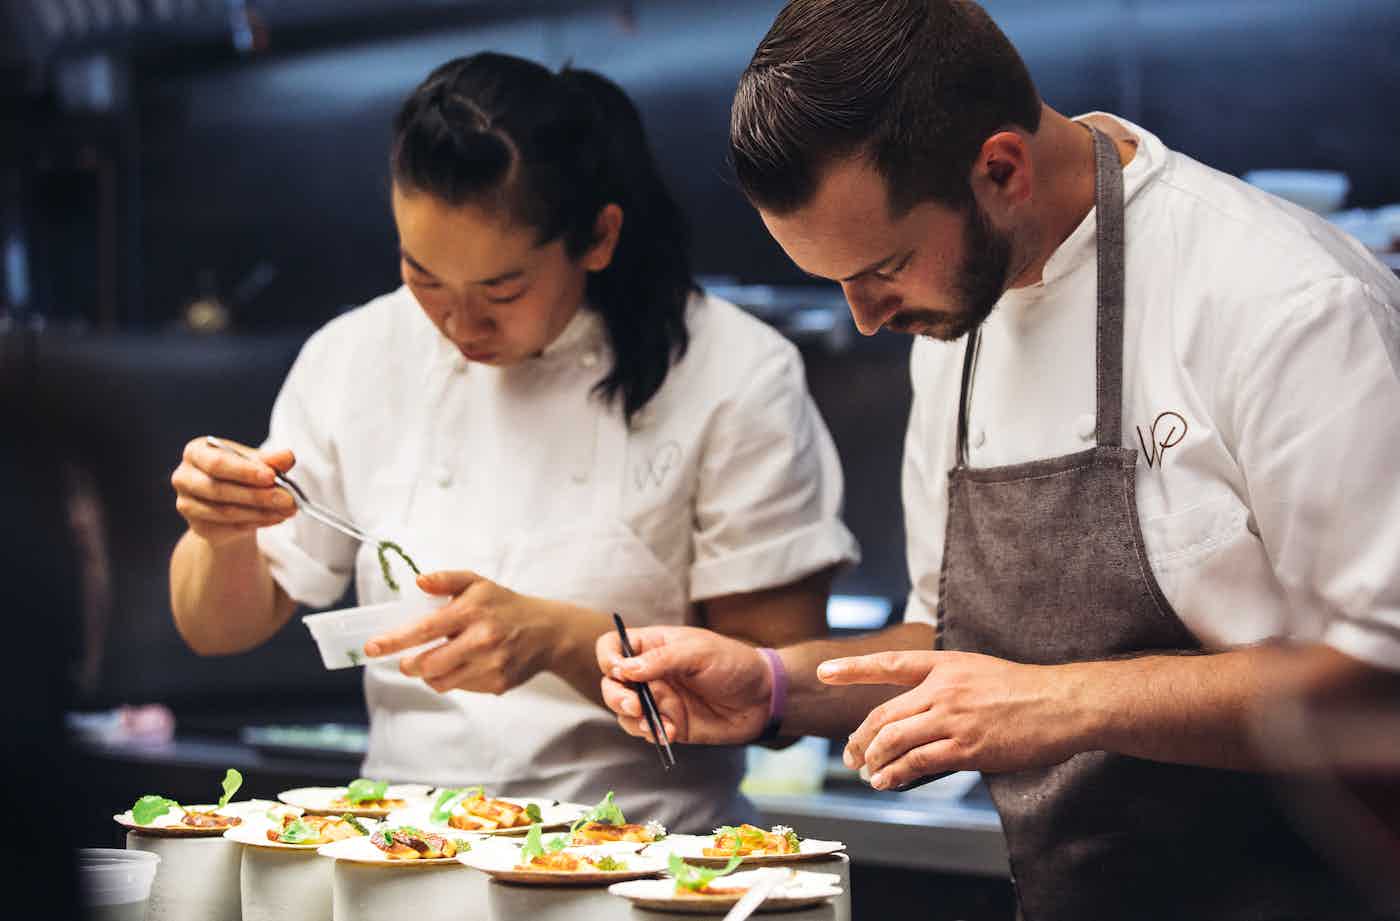 Two chefs plating dishes